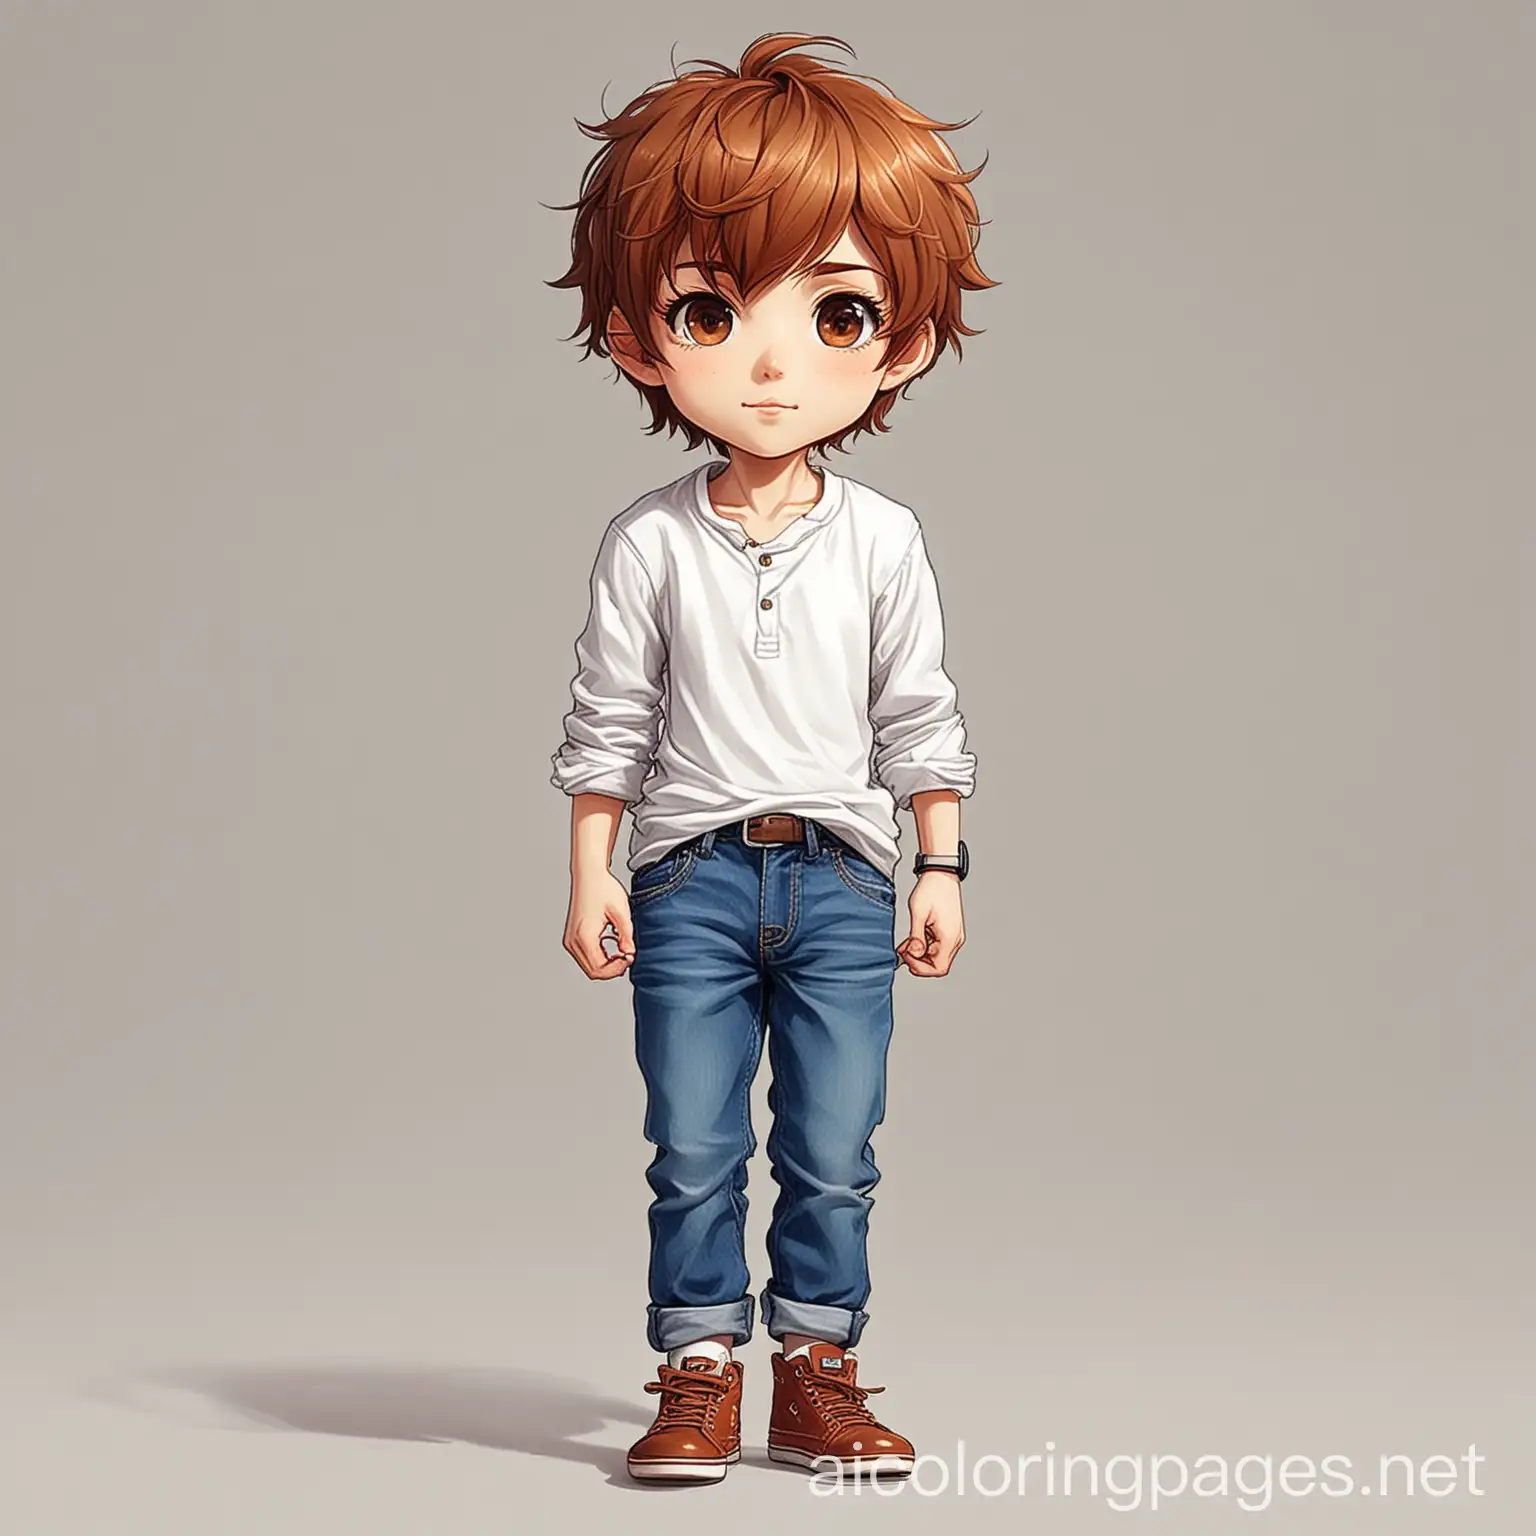 A captivating pop art rendition of a chibi anime-style British boy, exuding charm and style in his casual attire. The subject dons classic blue jeans, rolled up slightly at the ankles, and a crisp white t-shirt. His chestnut brown hair is tousled, framing his face with expressive, large hazel eyes that gleam with curiosity and determination. The simplicity of his outfit highlights his vibrant personality, making a bold statement against the plain white background. This delightful illustration encapsulates the essence of youthful energy and modern style, with the artwork's whimsical allure enhanced by the contrasting colors of his outfit, Coloring Page, black and white, line art, white background, Simplicity, Ample White Space.